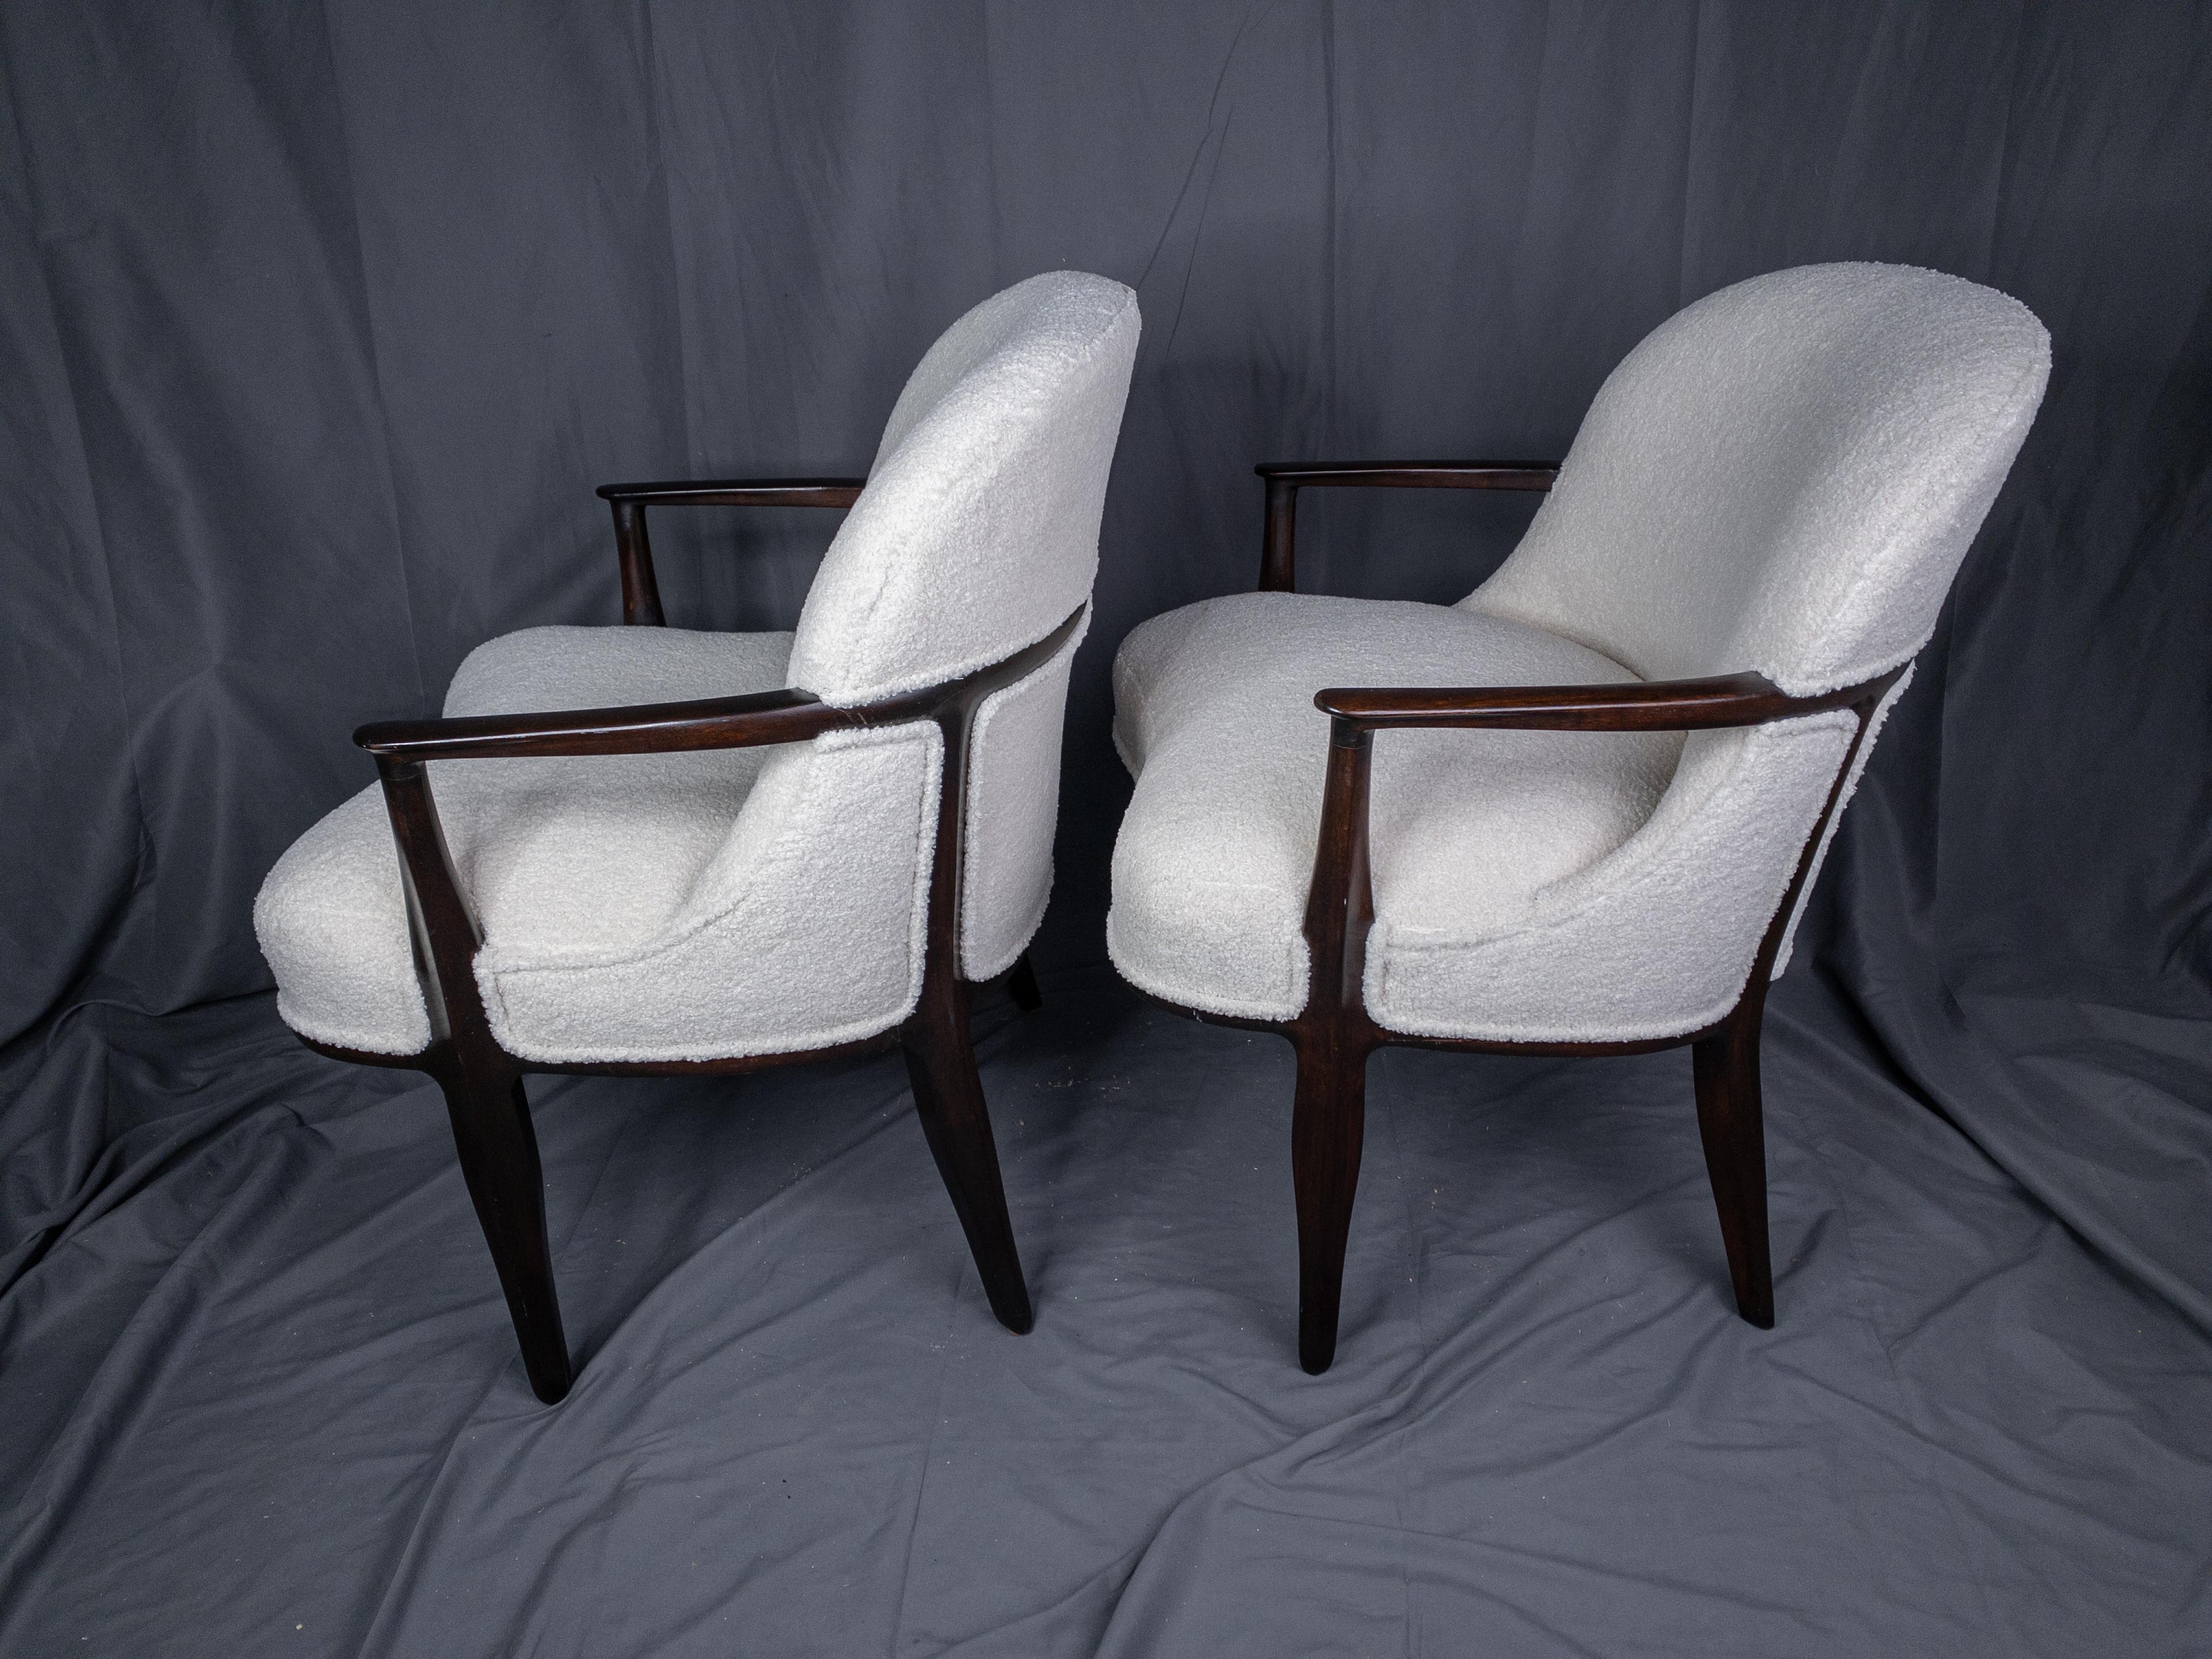 Carved Pair of Edward Wormley Rosewood Janus Lounge Chairs in Bouclé Fabric for Dunbar For Sale